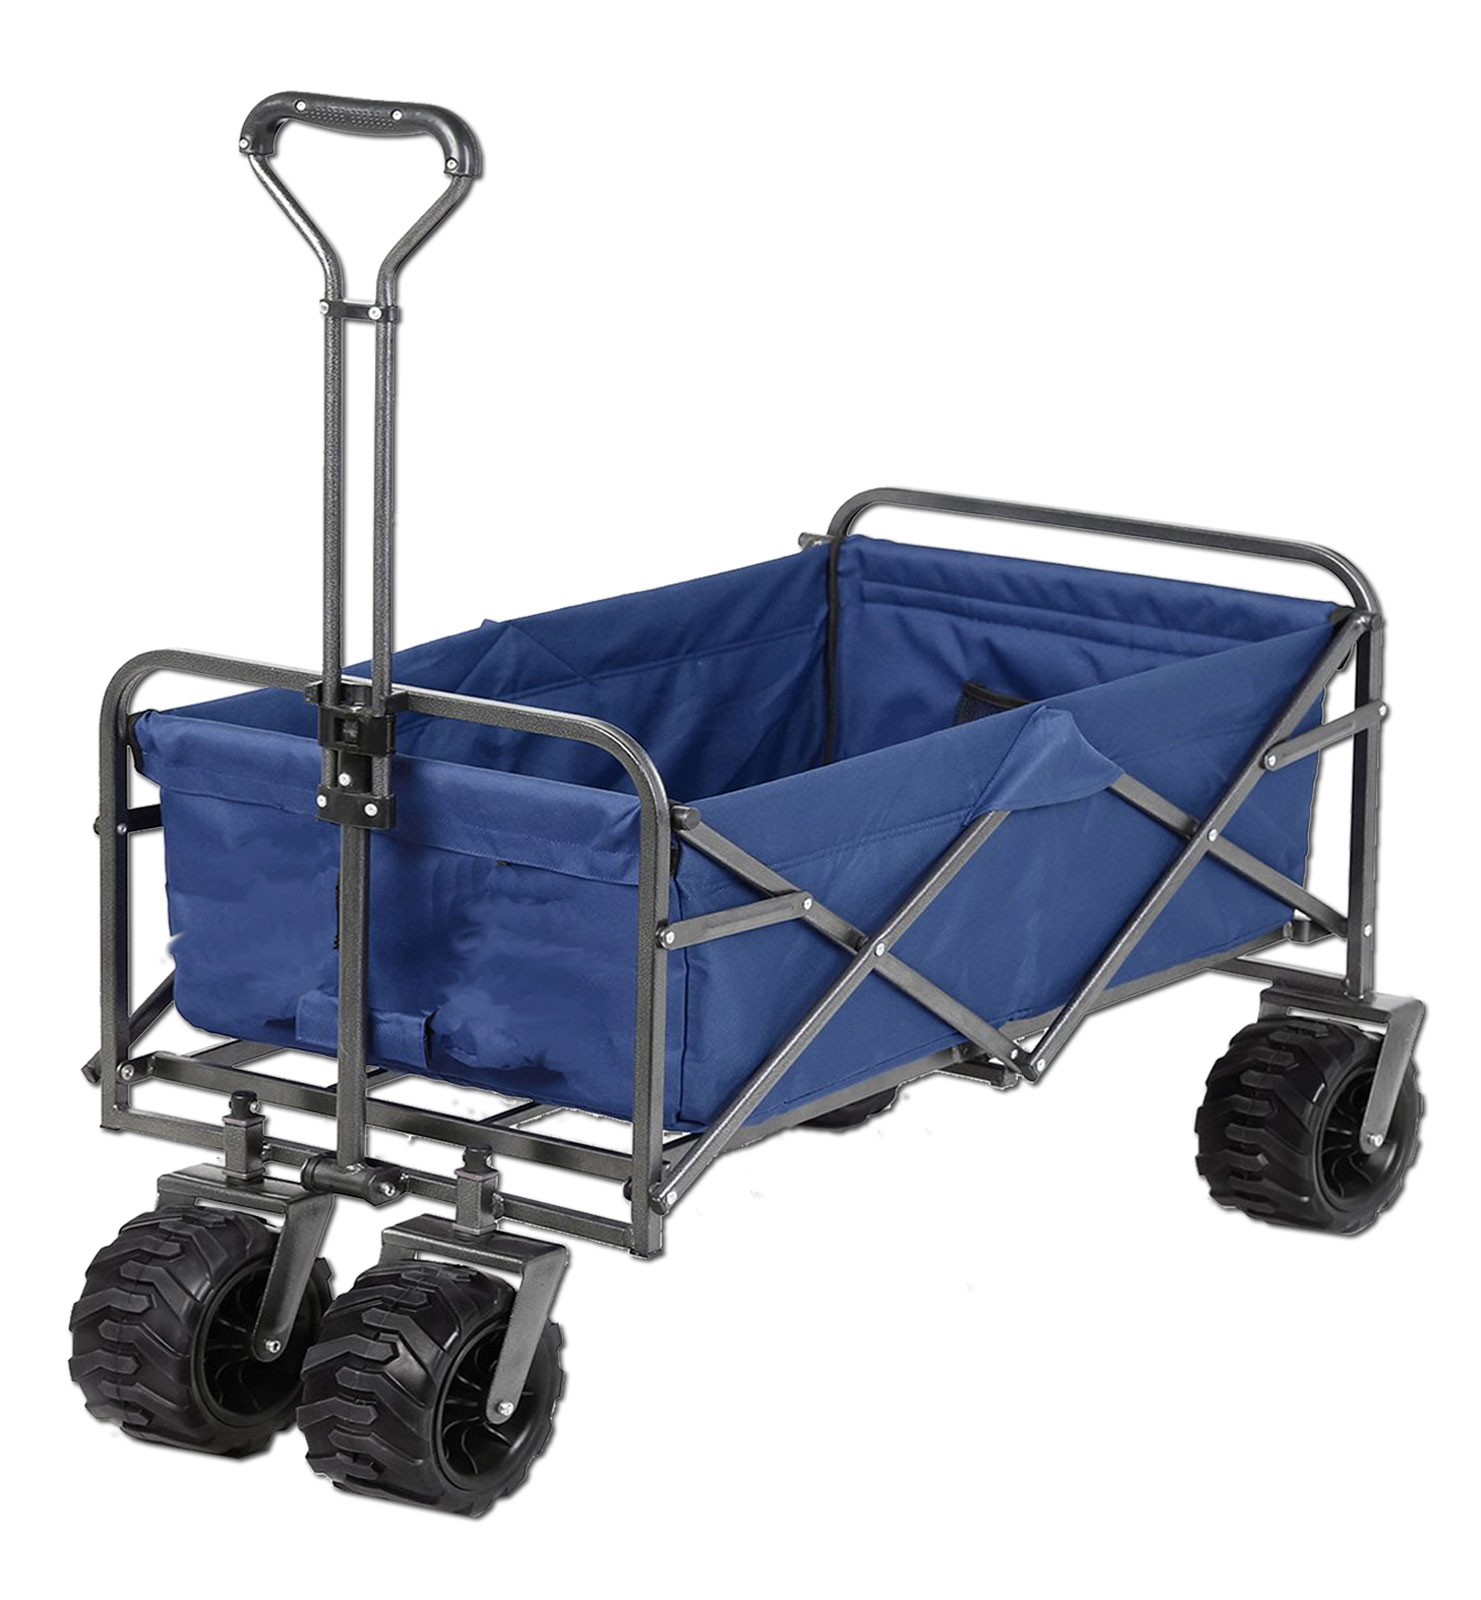 Details about   Wagon Cart Beach Collapsible Folding Camping Trolley Garden Utility Grocery Cart 